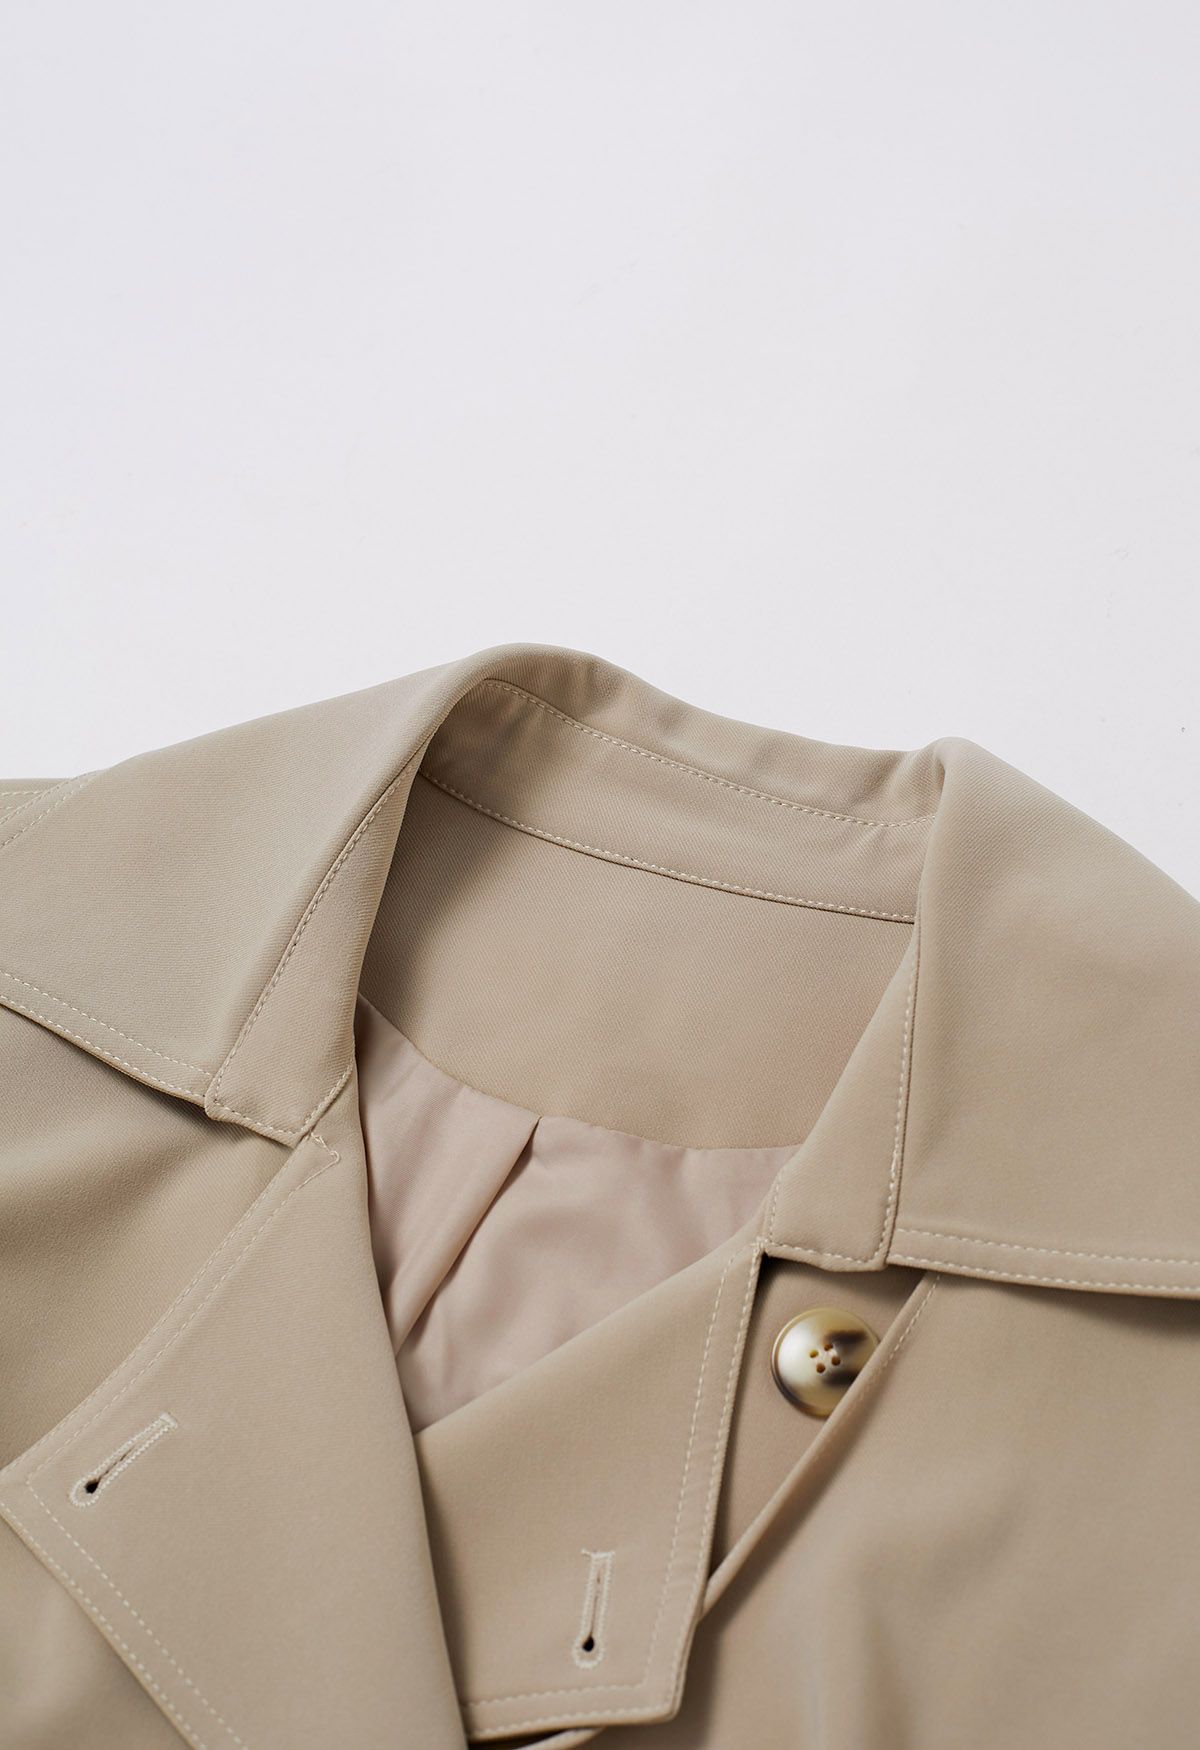 Ruffle Trimmed Belted Double-Breasted Trench Coat in Khaki